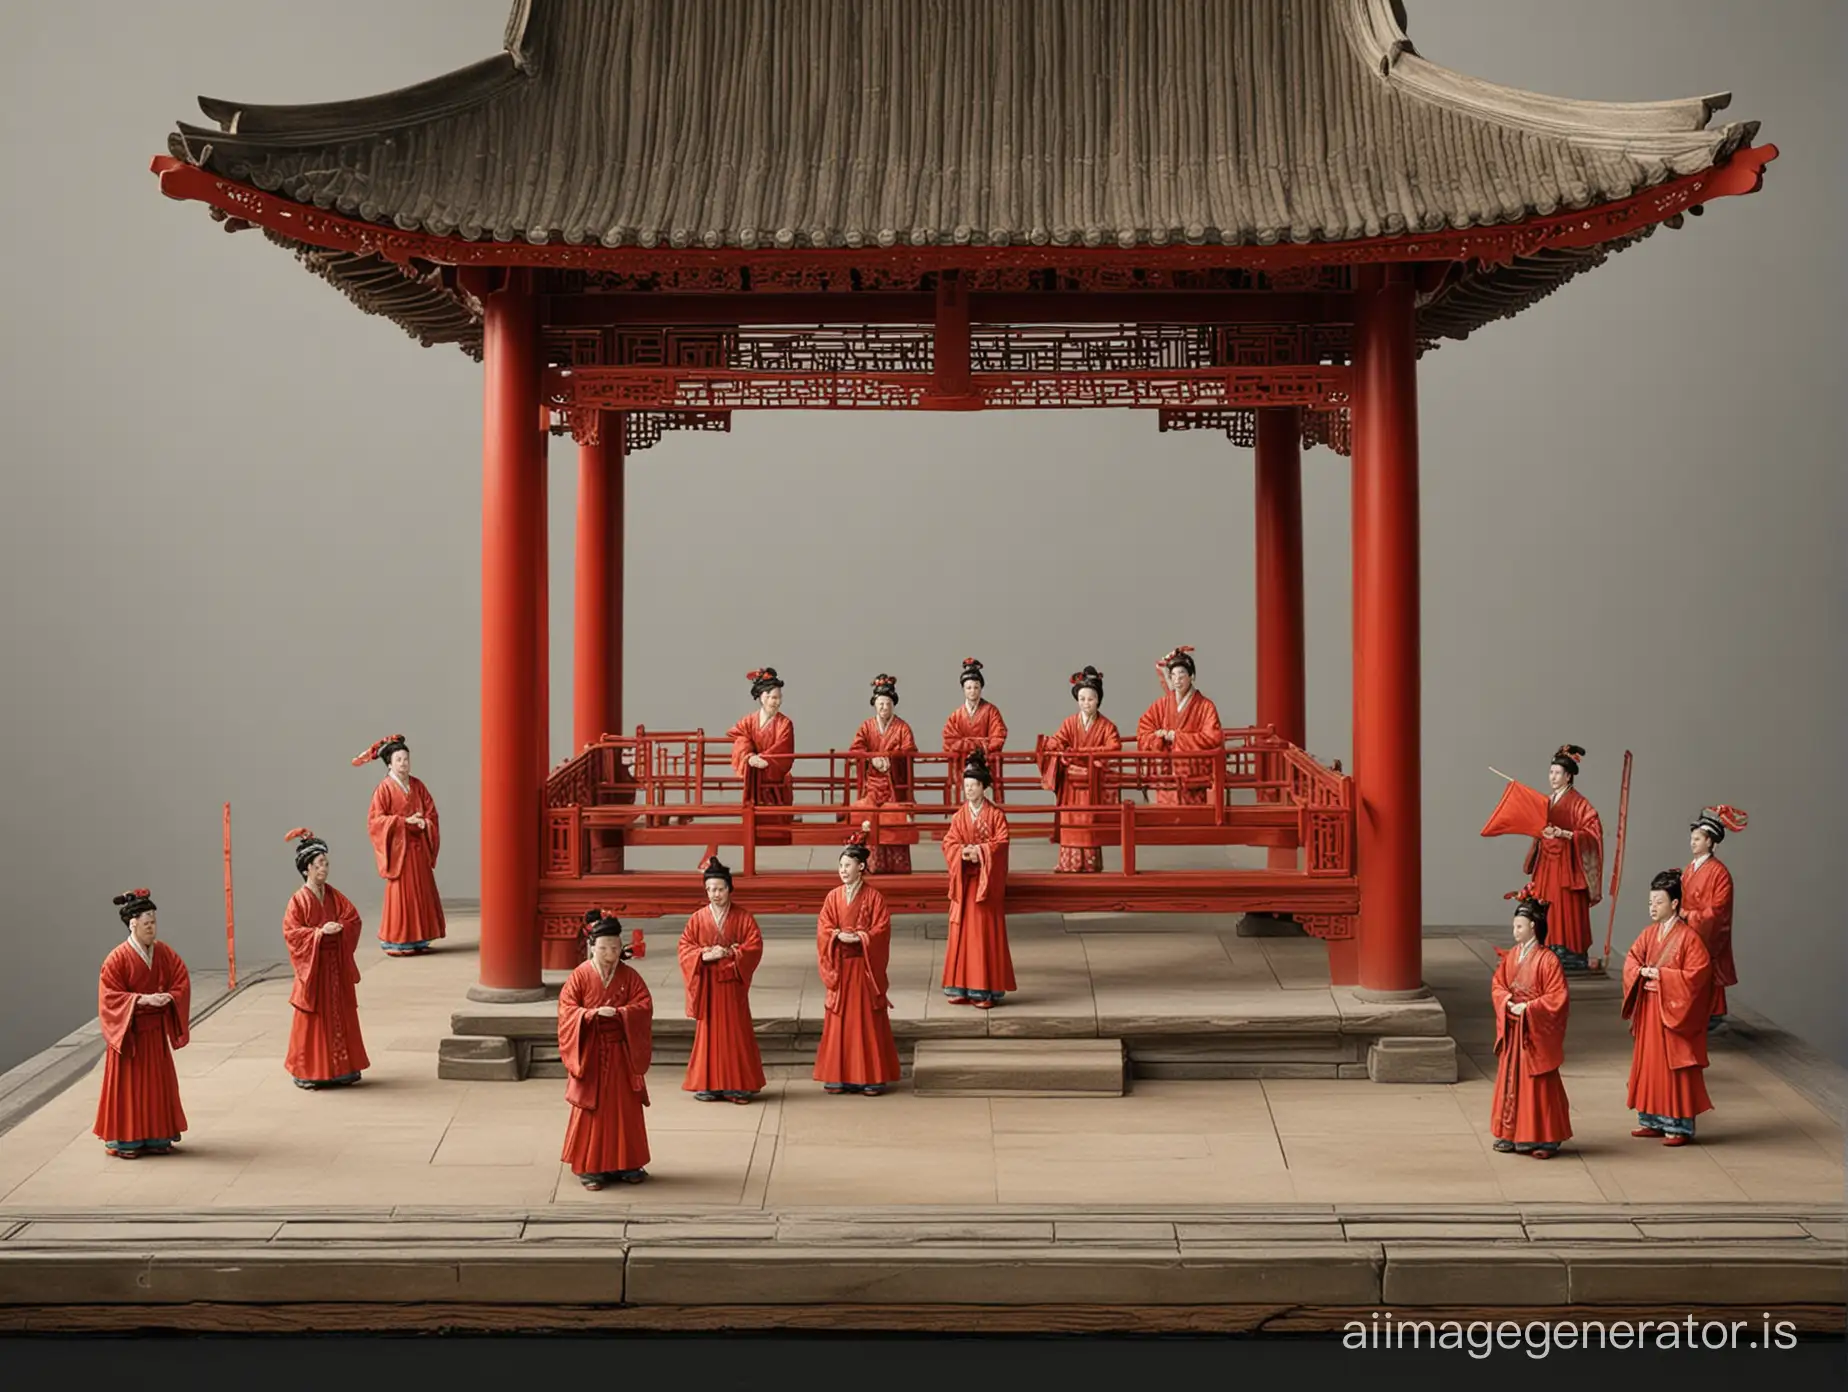 A Chinese Ming Dynasty matchmaking pavilion with a red architectural theme. The stage is 1.5 meters above the ground and has a simple background. Beautiful women and matchmakers stand on the stage, while six men look at the women on the stage. The characters in the picture are combined with modern style